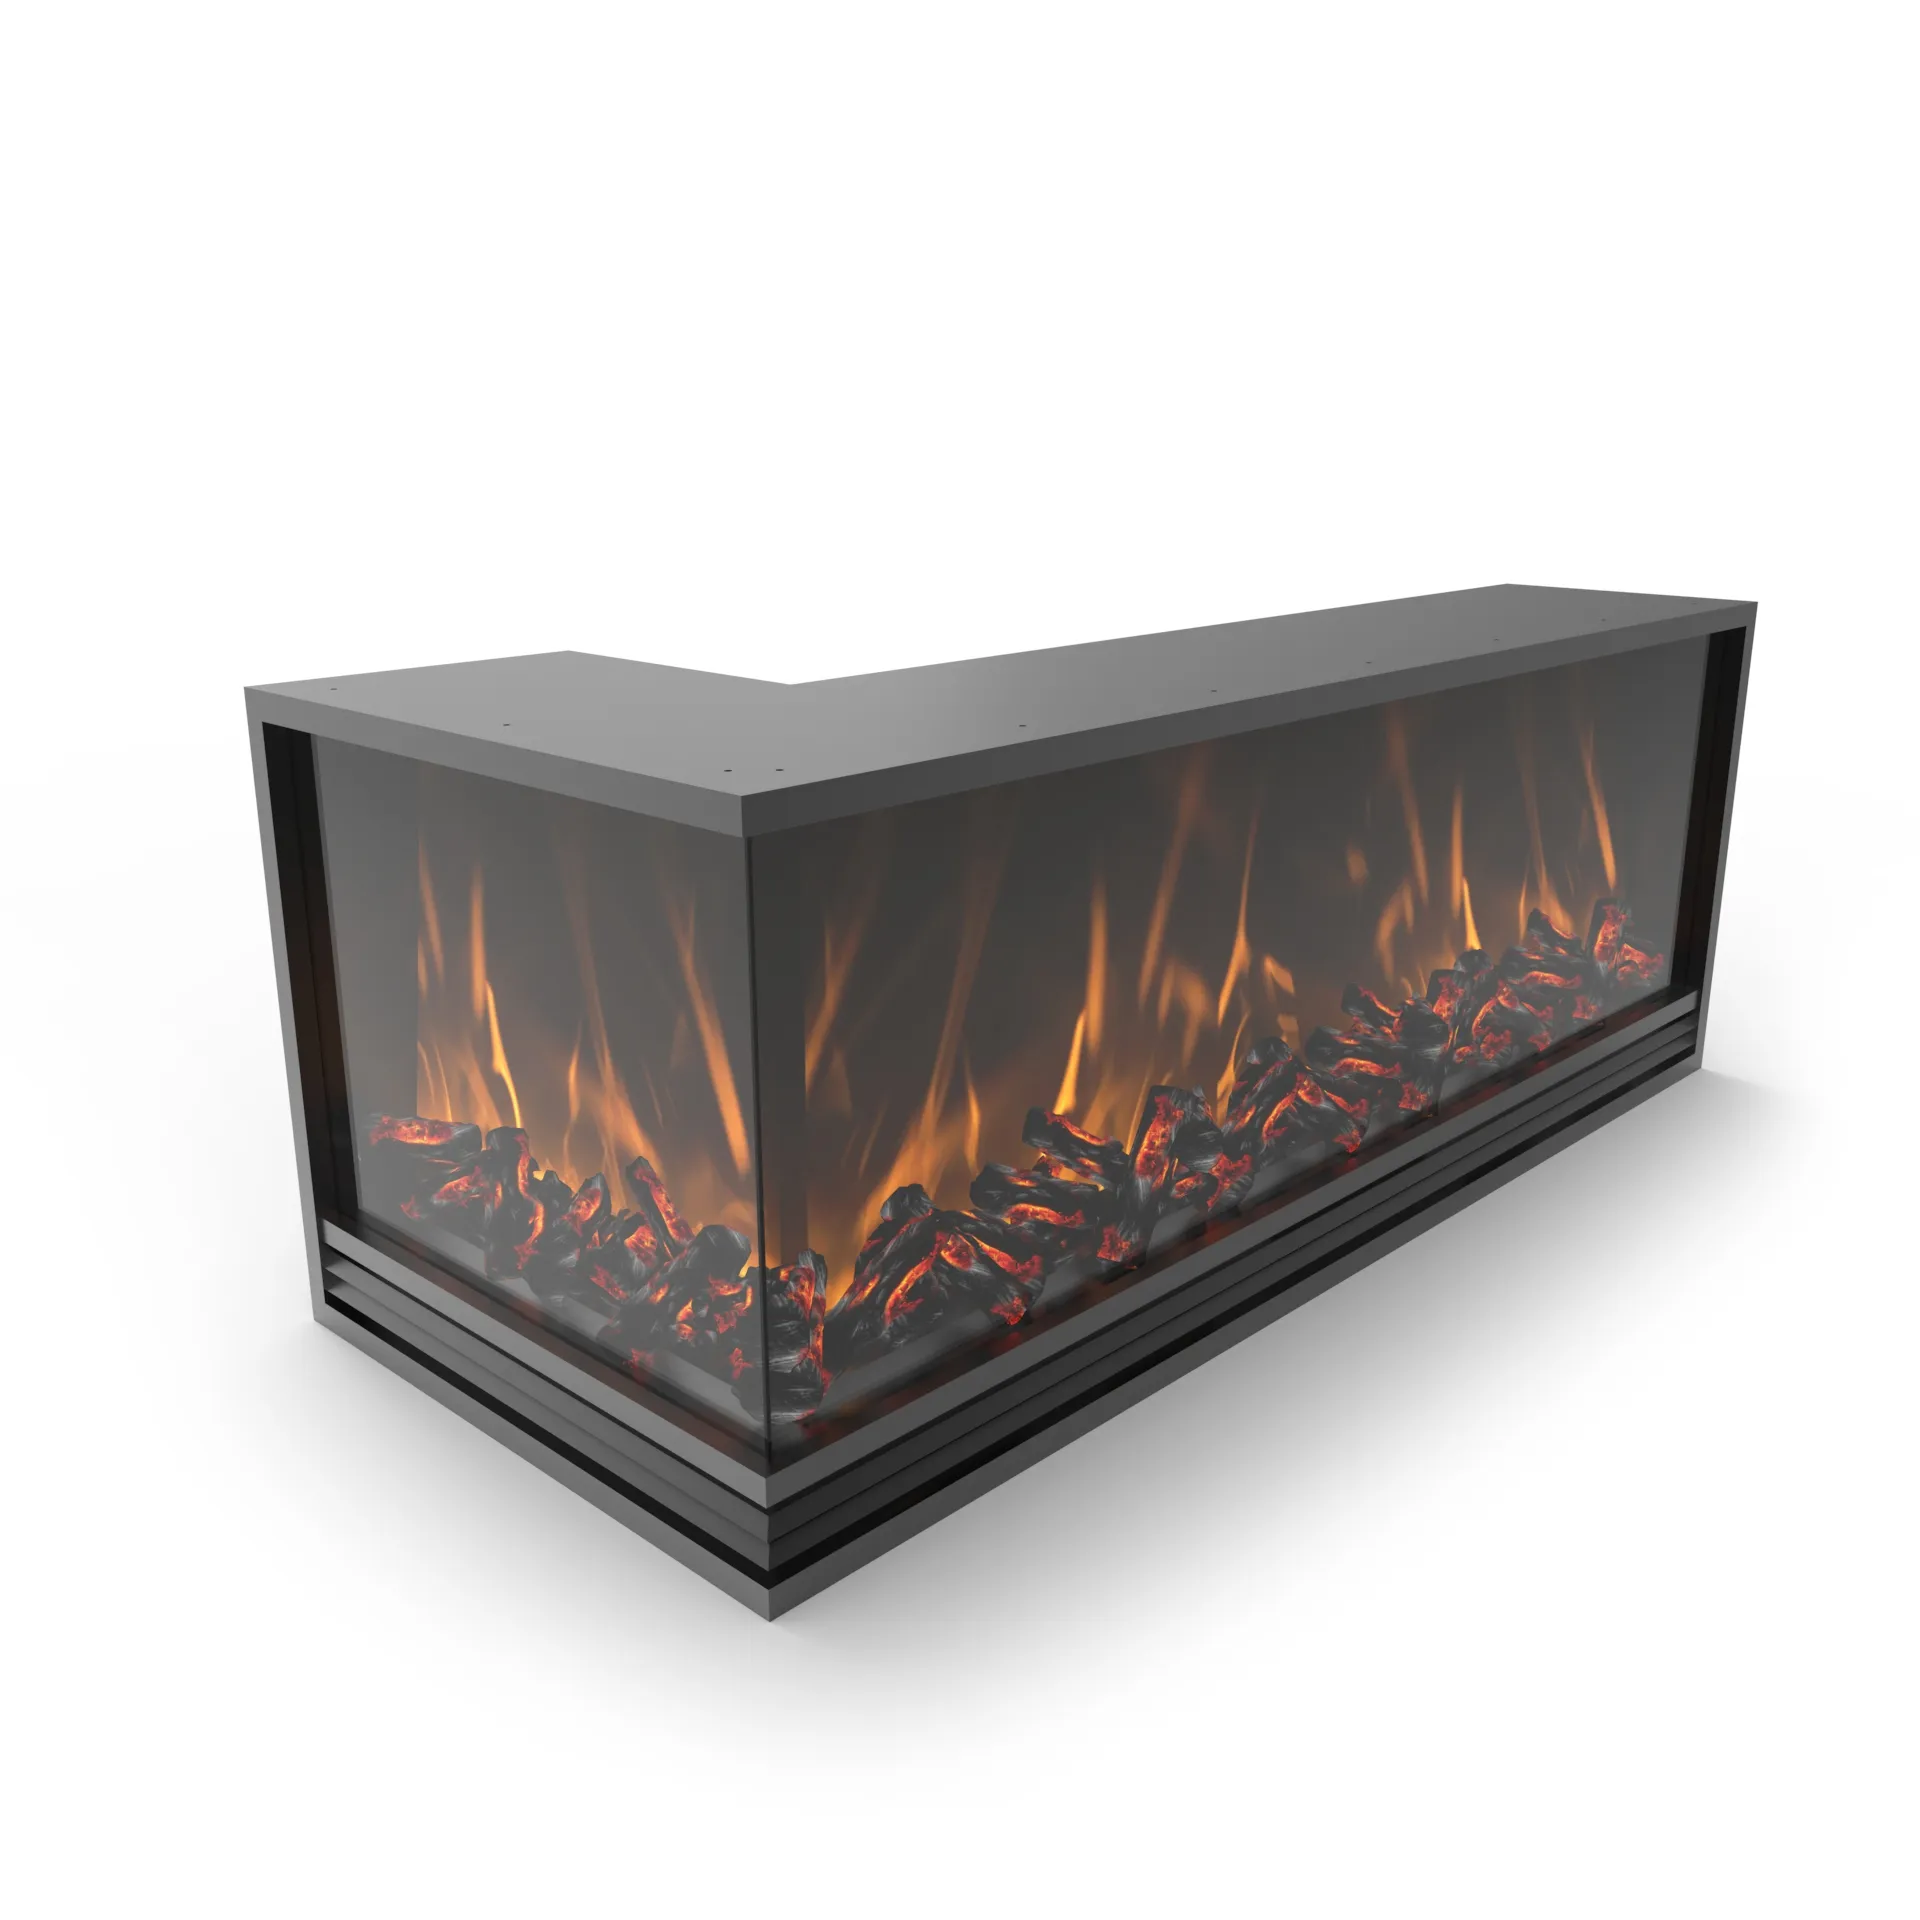 Prima hot sale fireplaces outdoor fireplace propane fireplace stove with central heating